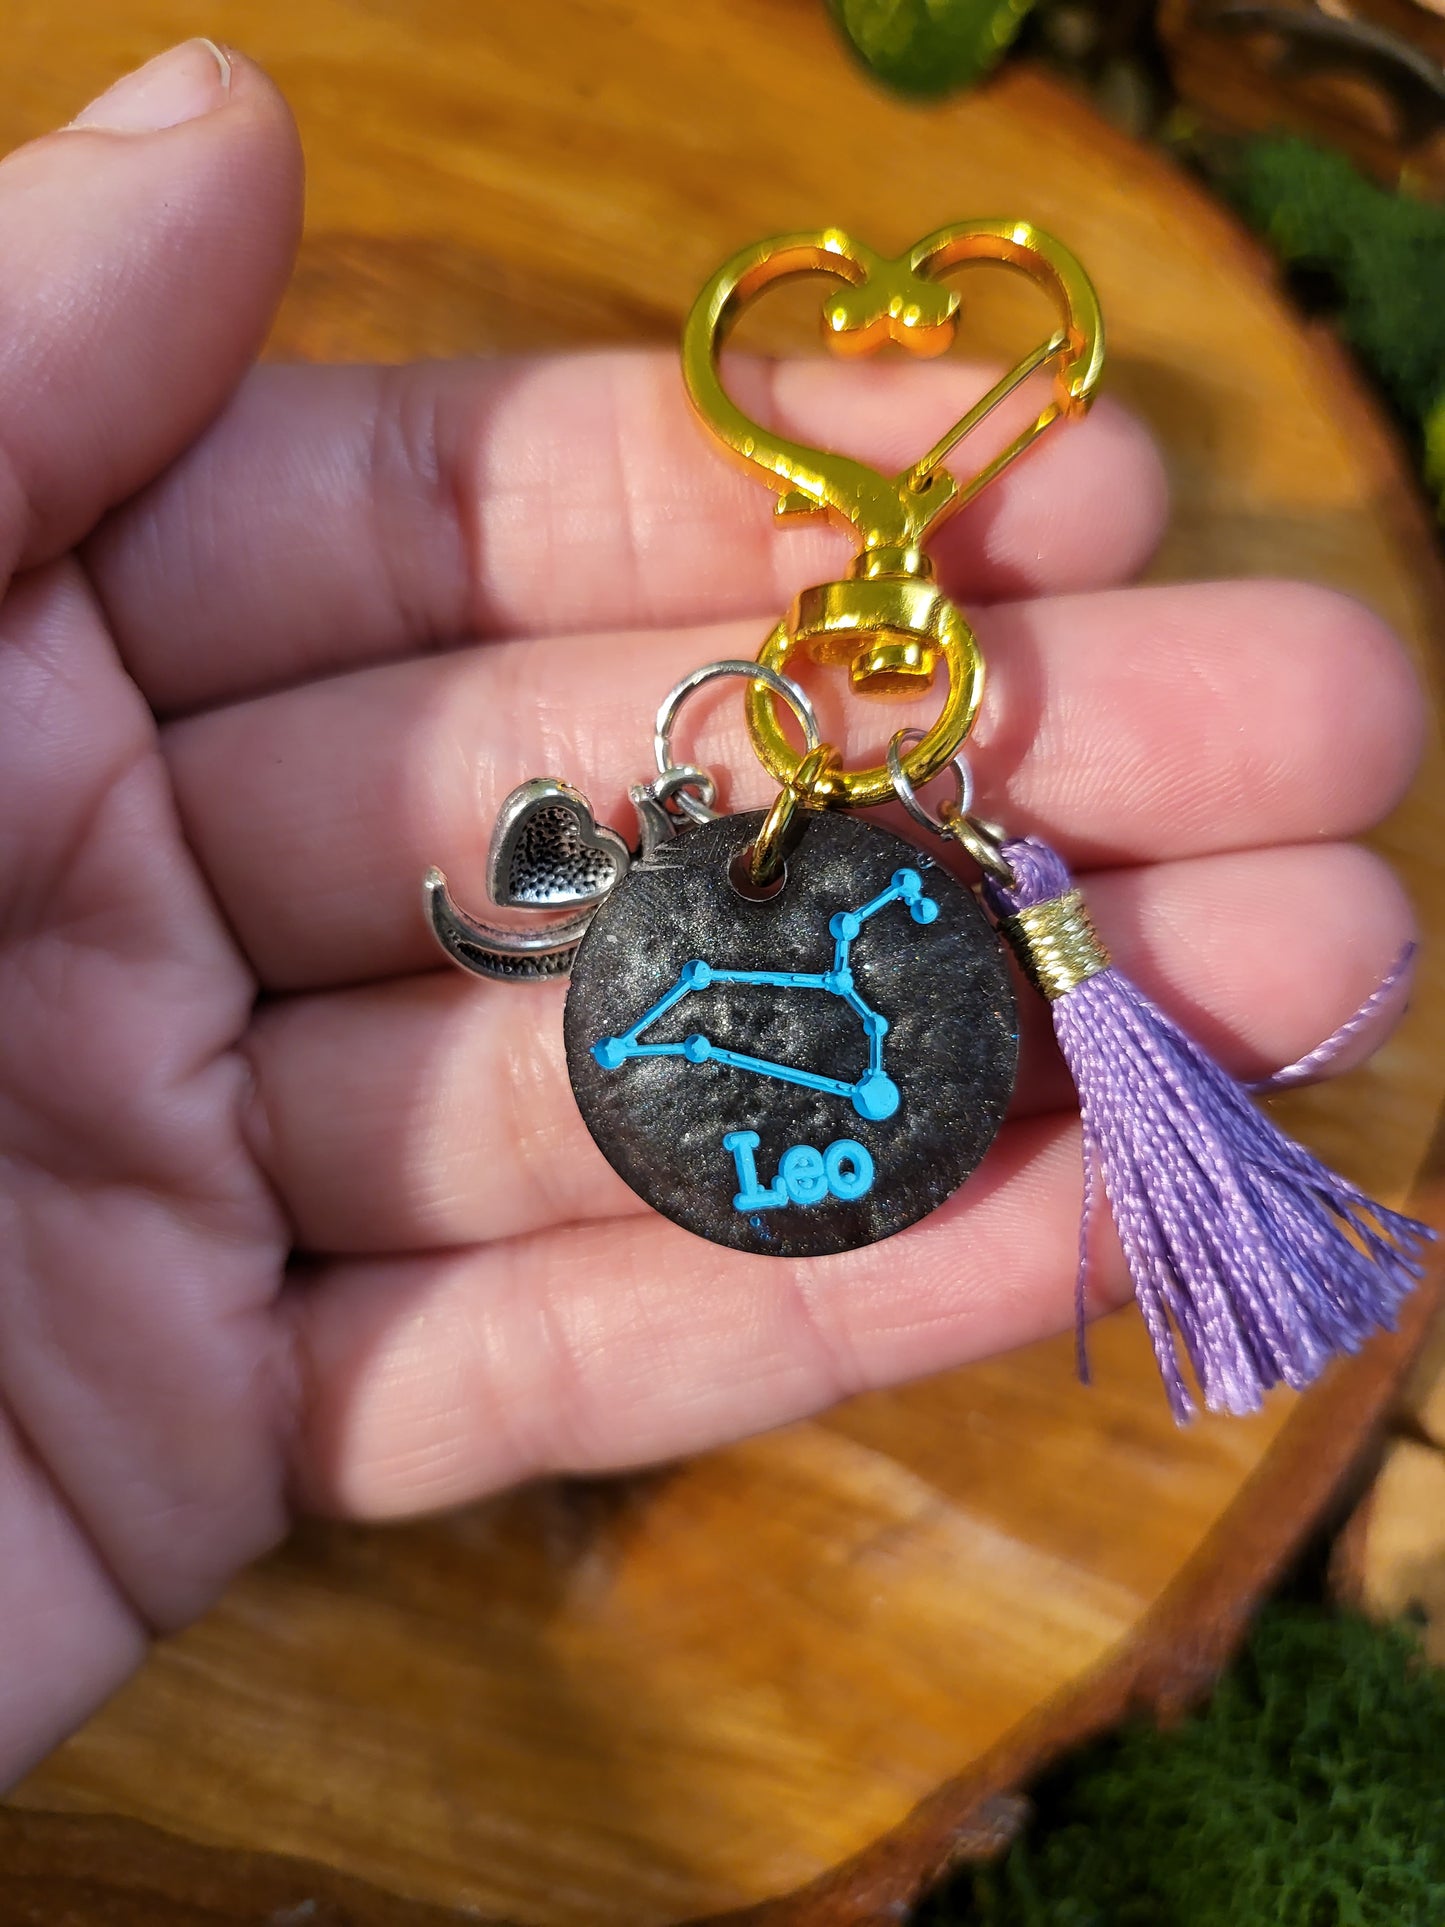 Graphite Gray and Teal Astrological Keychains with Charms